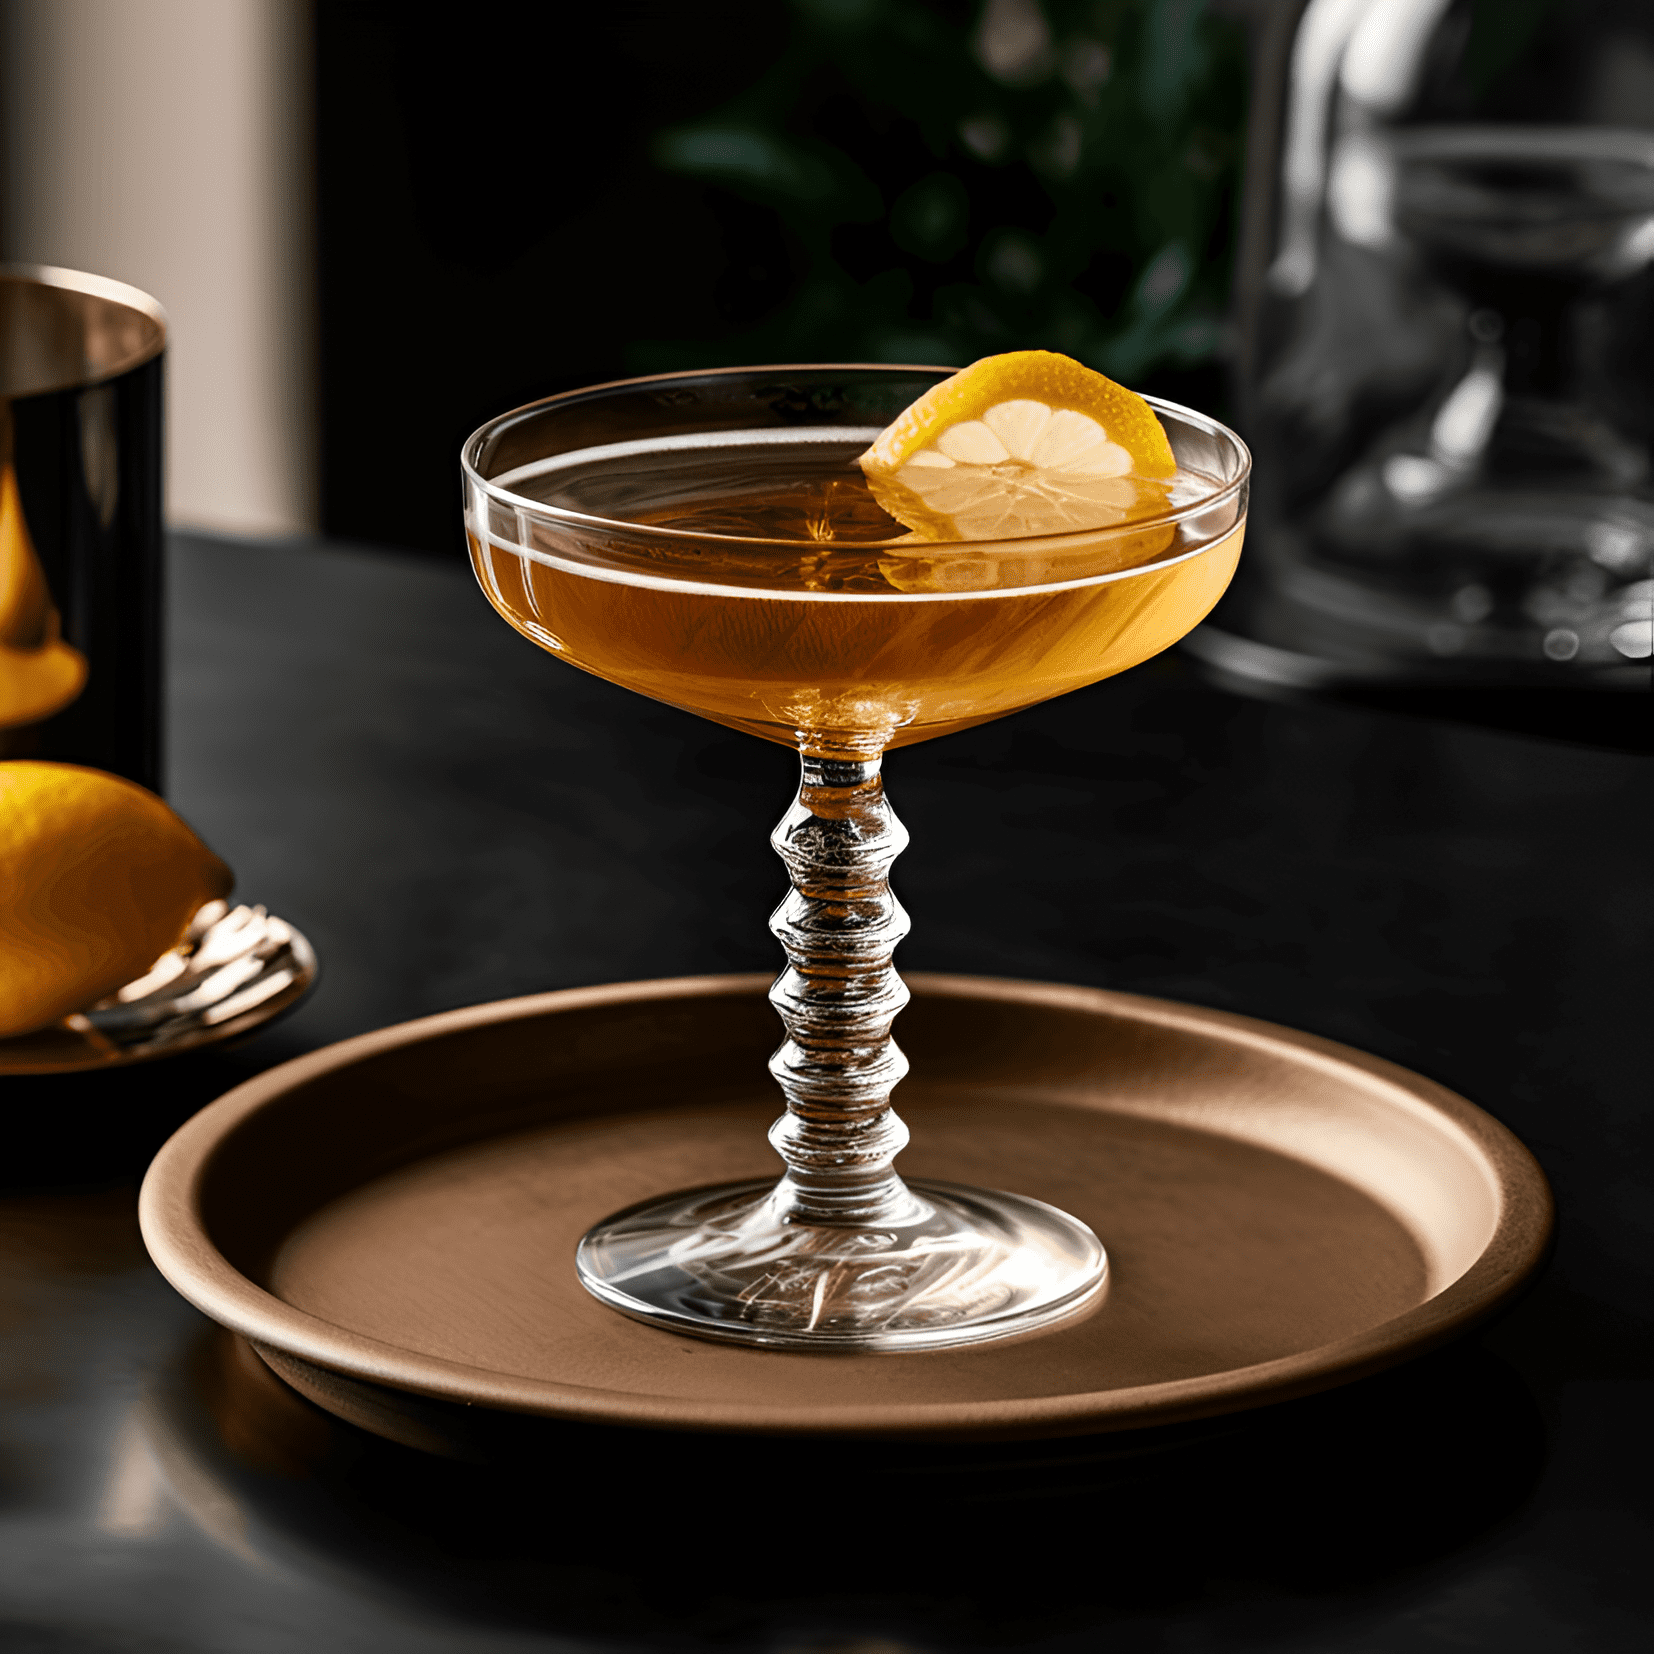 Monte Carlo Cocktail Recipe - The Monte Carlo cocktail is a smooth, rich, and slightly sweet drink with a hint of herbal bitterness from the Benedictine. It has a strong whiskey flavor, balanced by the sweetness of the syrup and the warmth of the bitters.